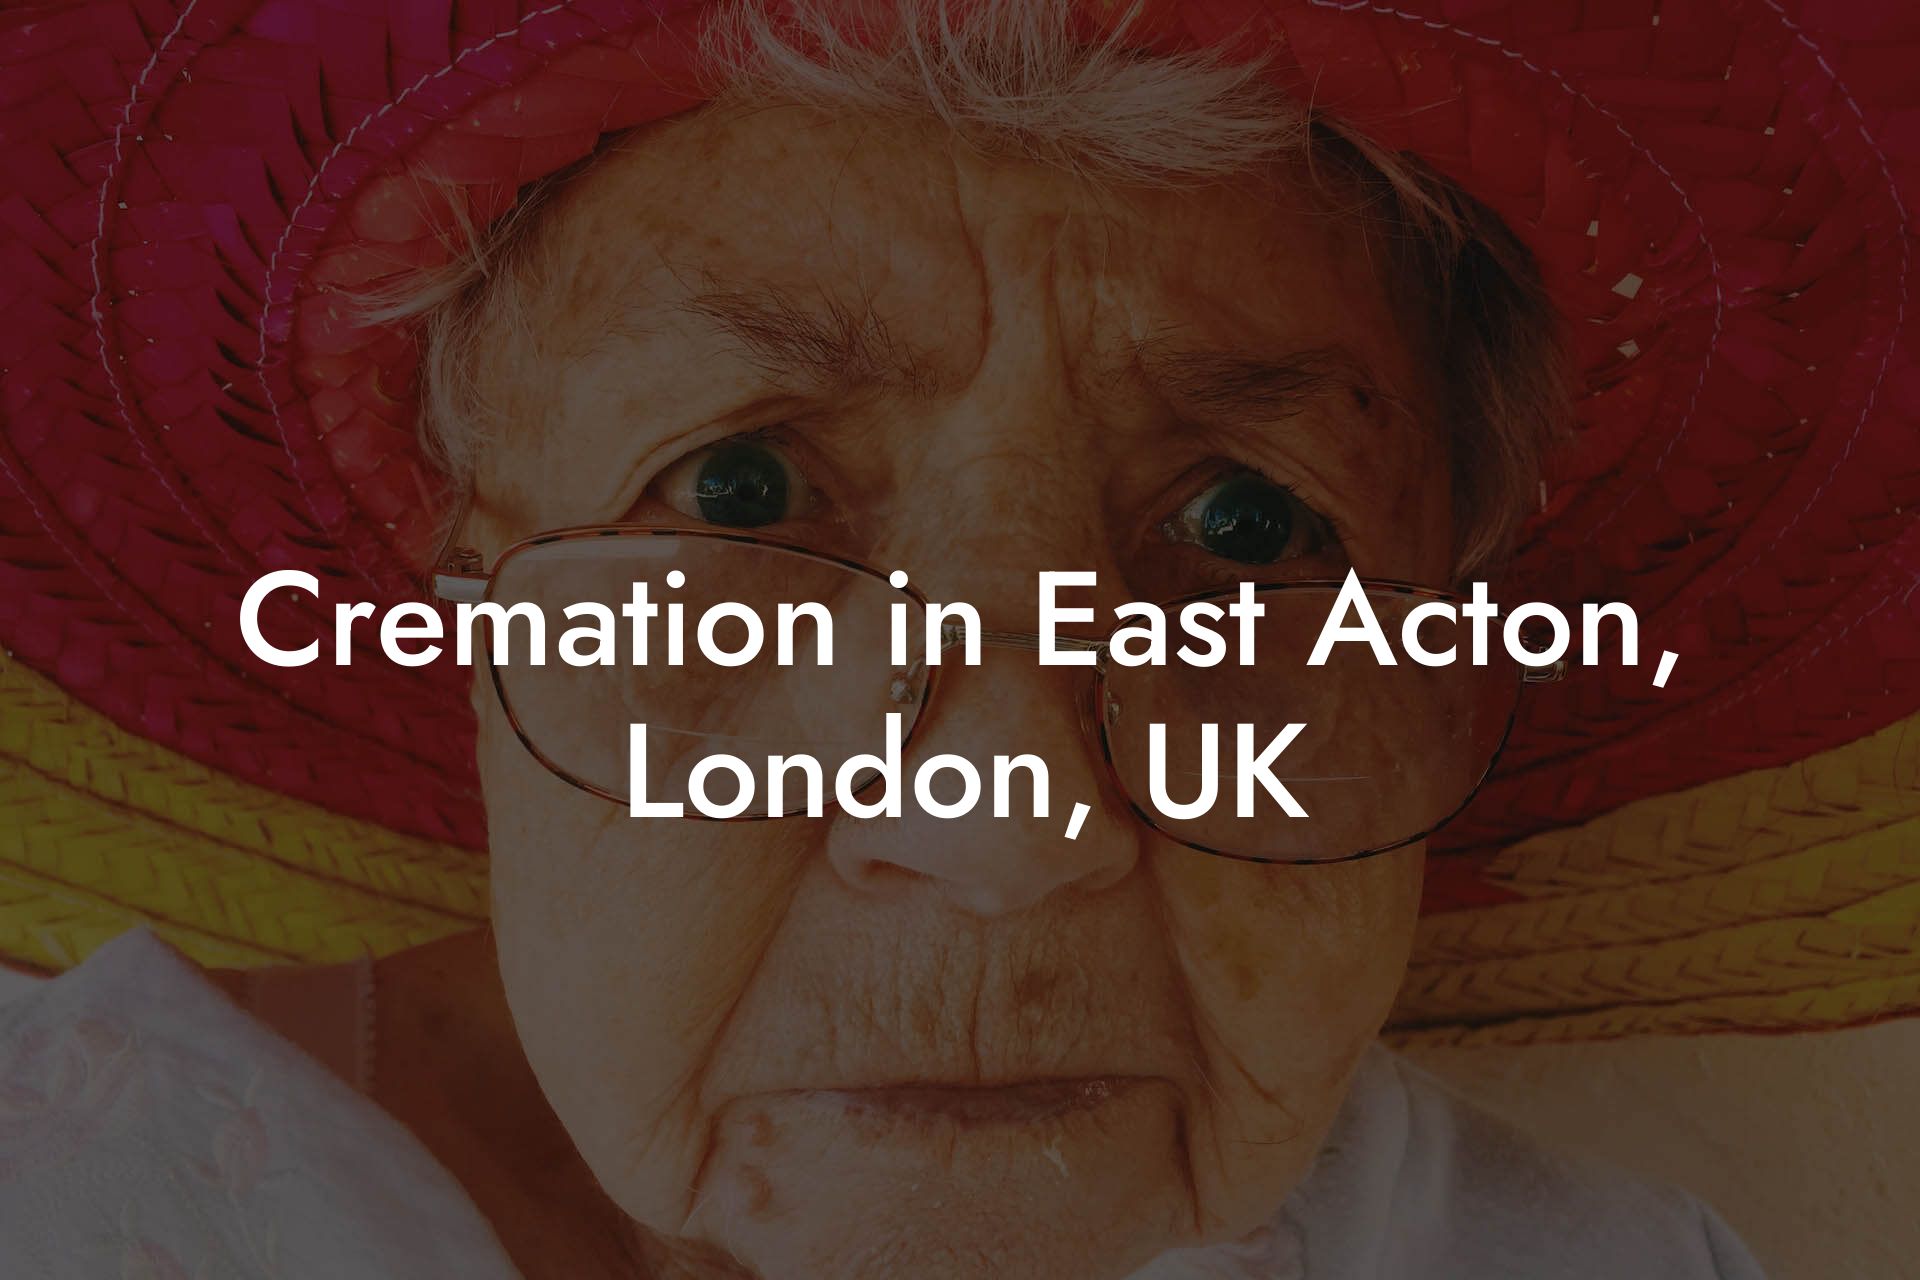 Cremation in East Acton, London, UK